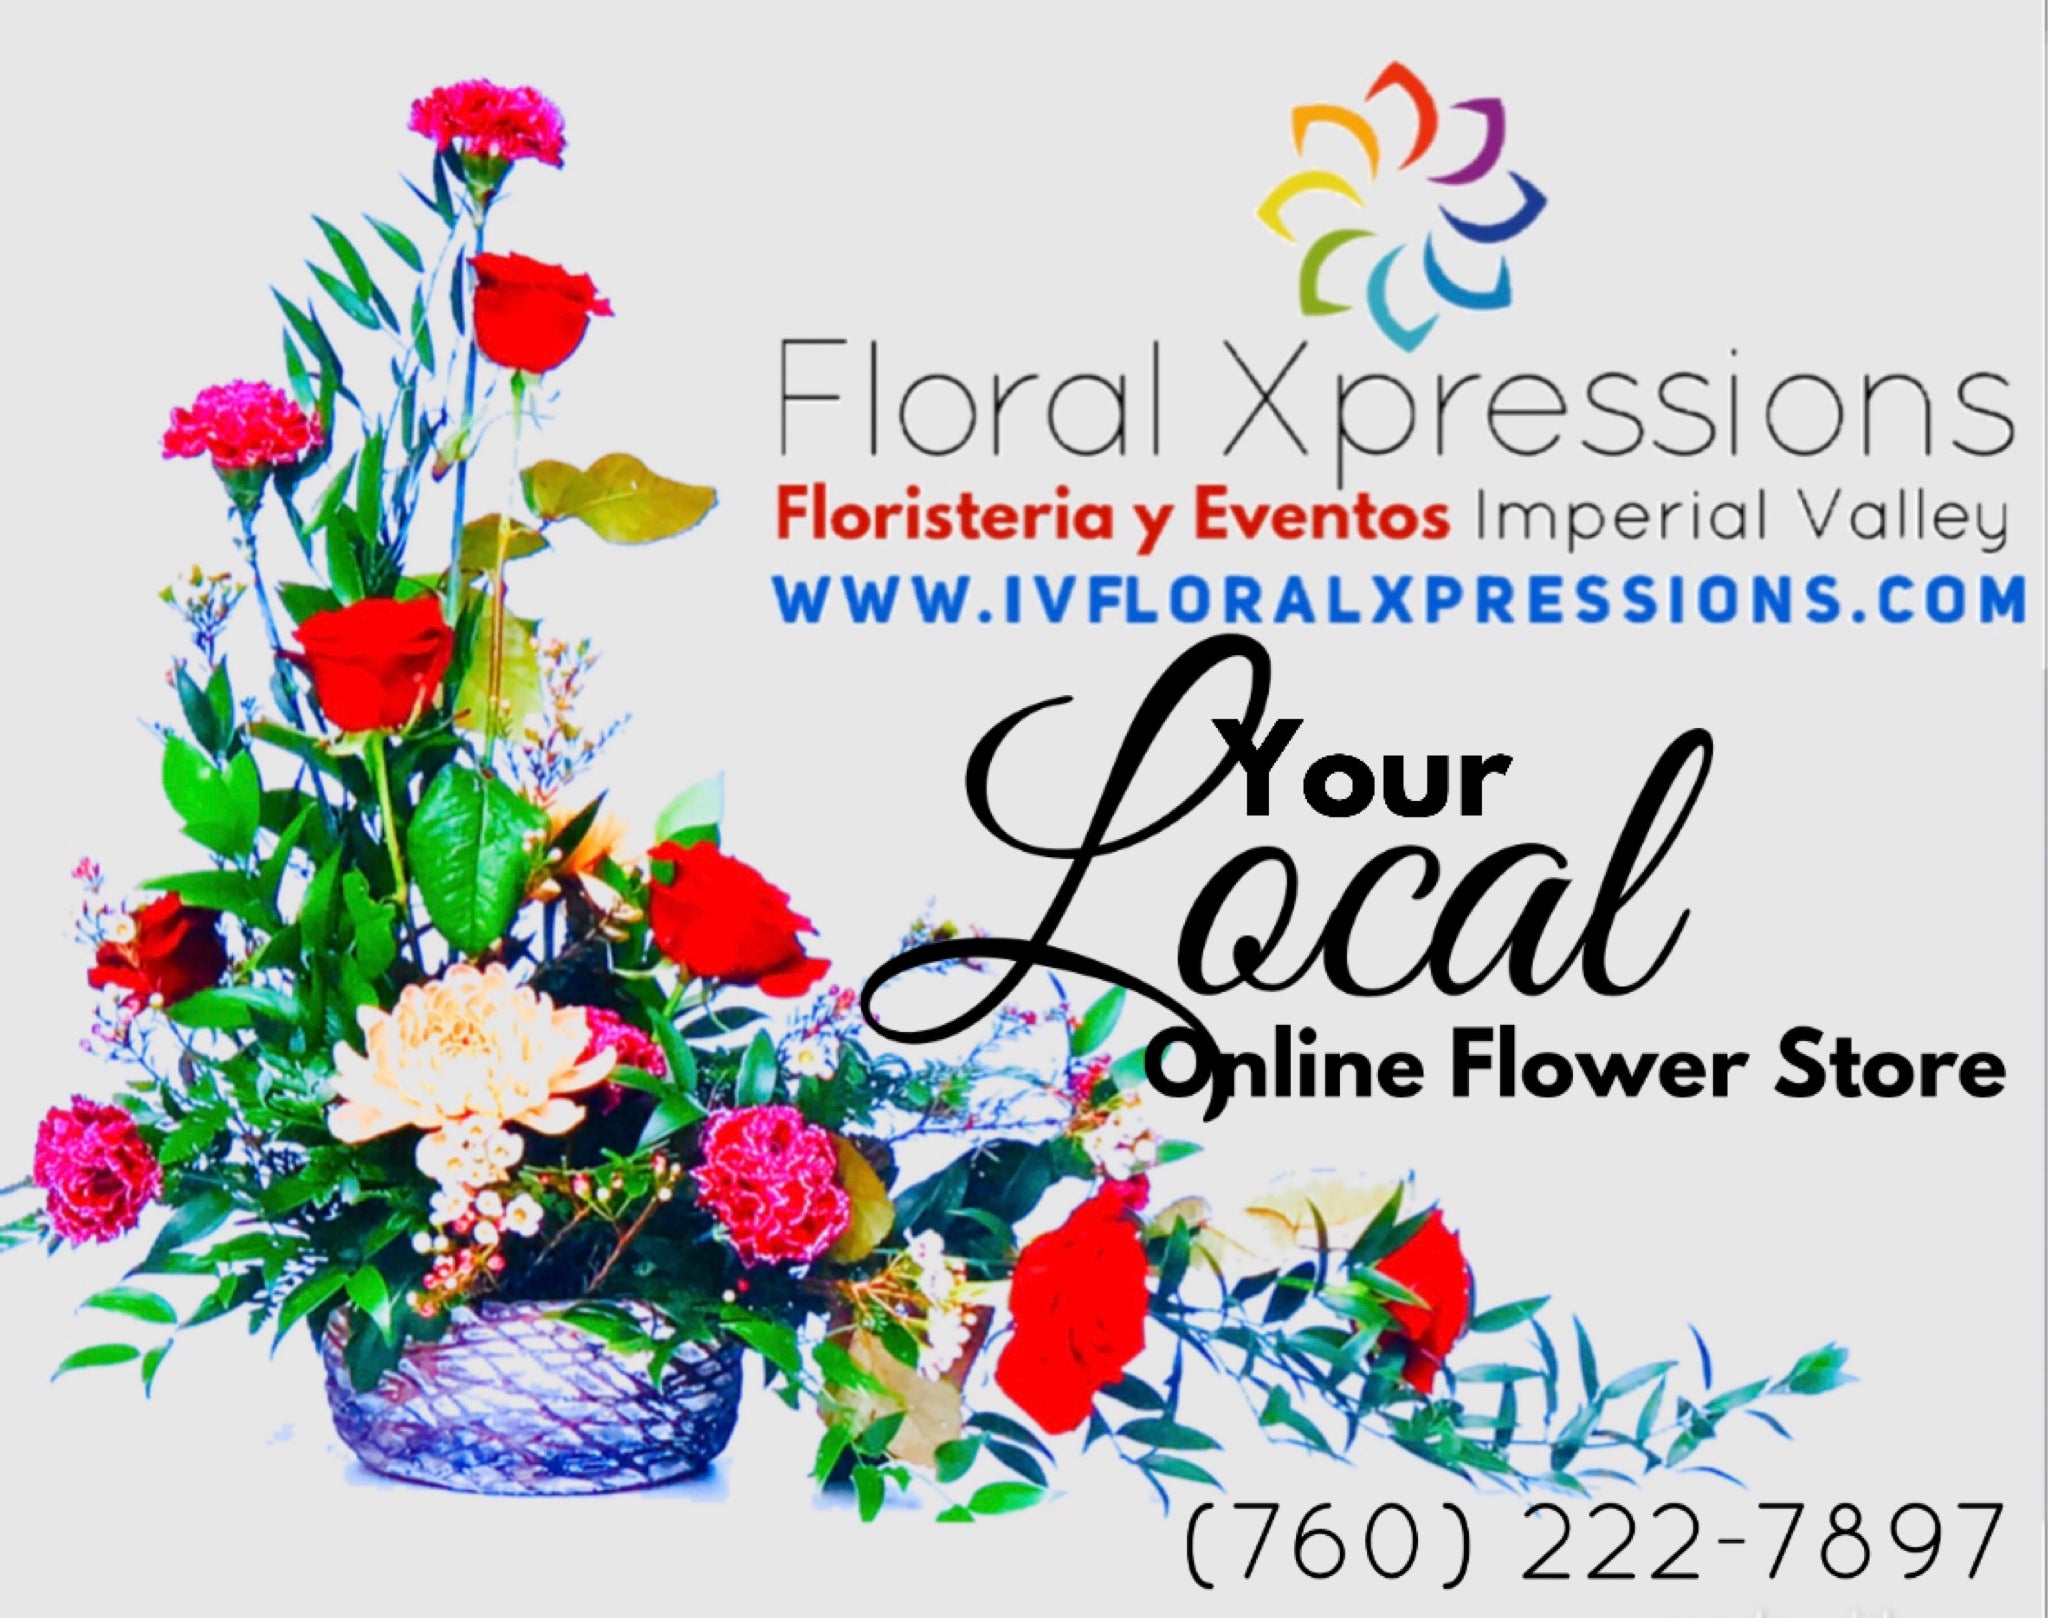 Floral Xpressions (Imperial Valley)